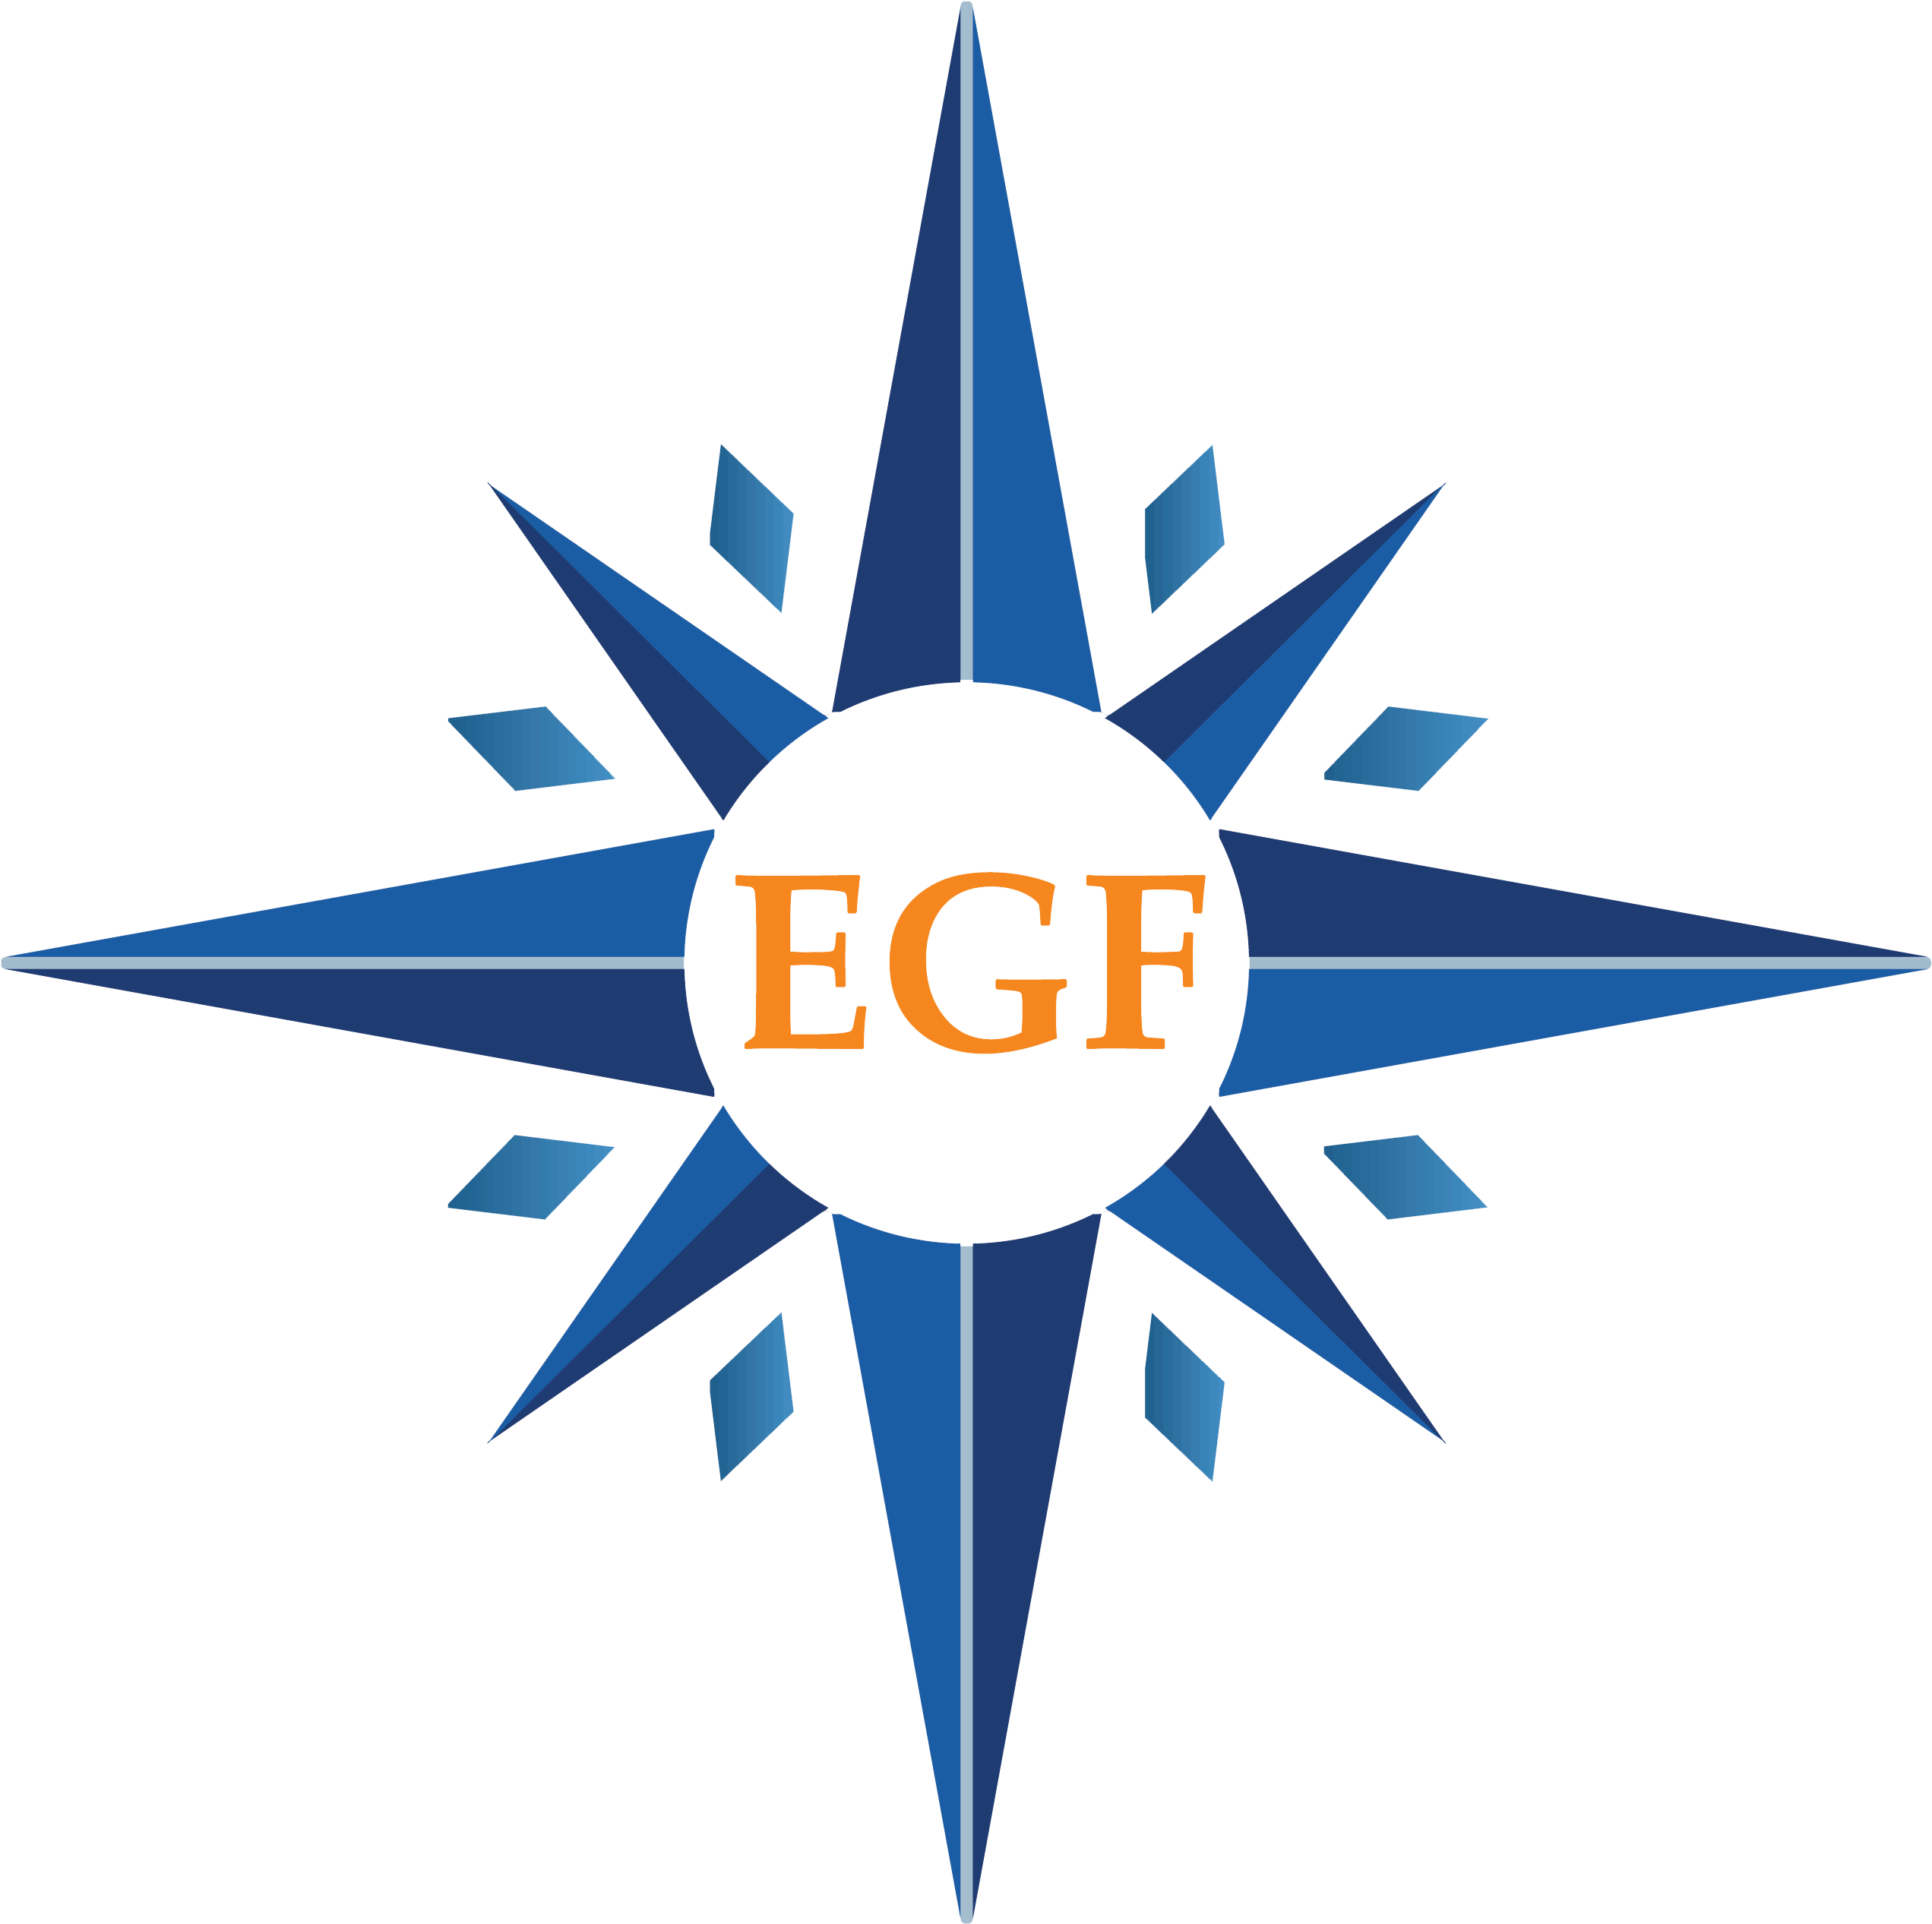 Egf On Twitter - Power Planets: A Manual For Human Empowerment (2602x2602)